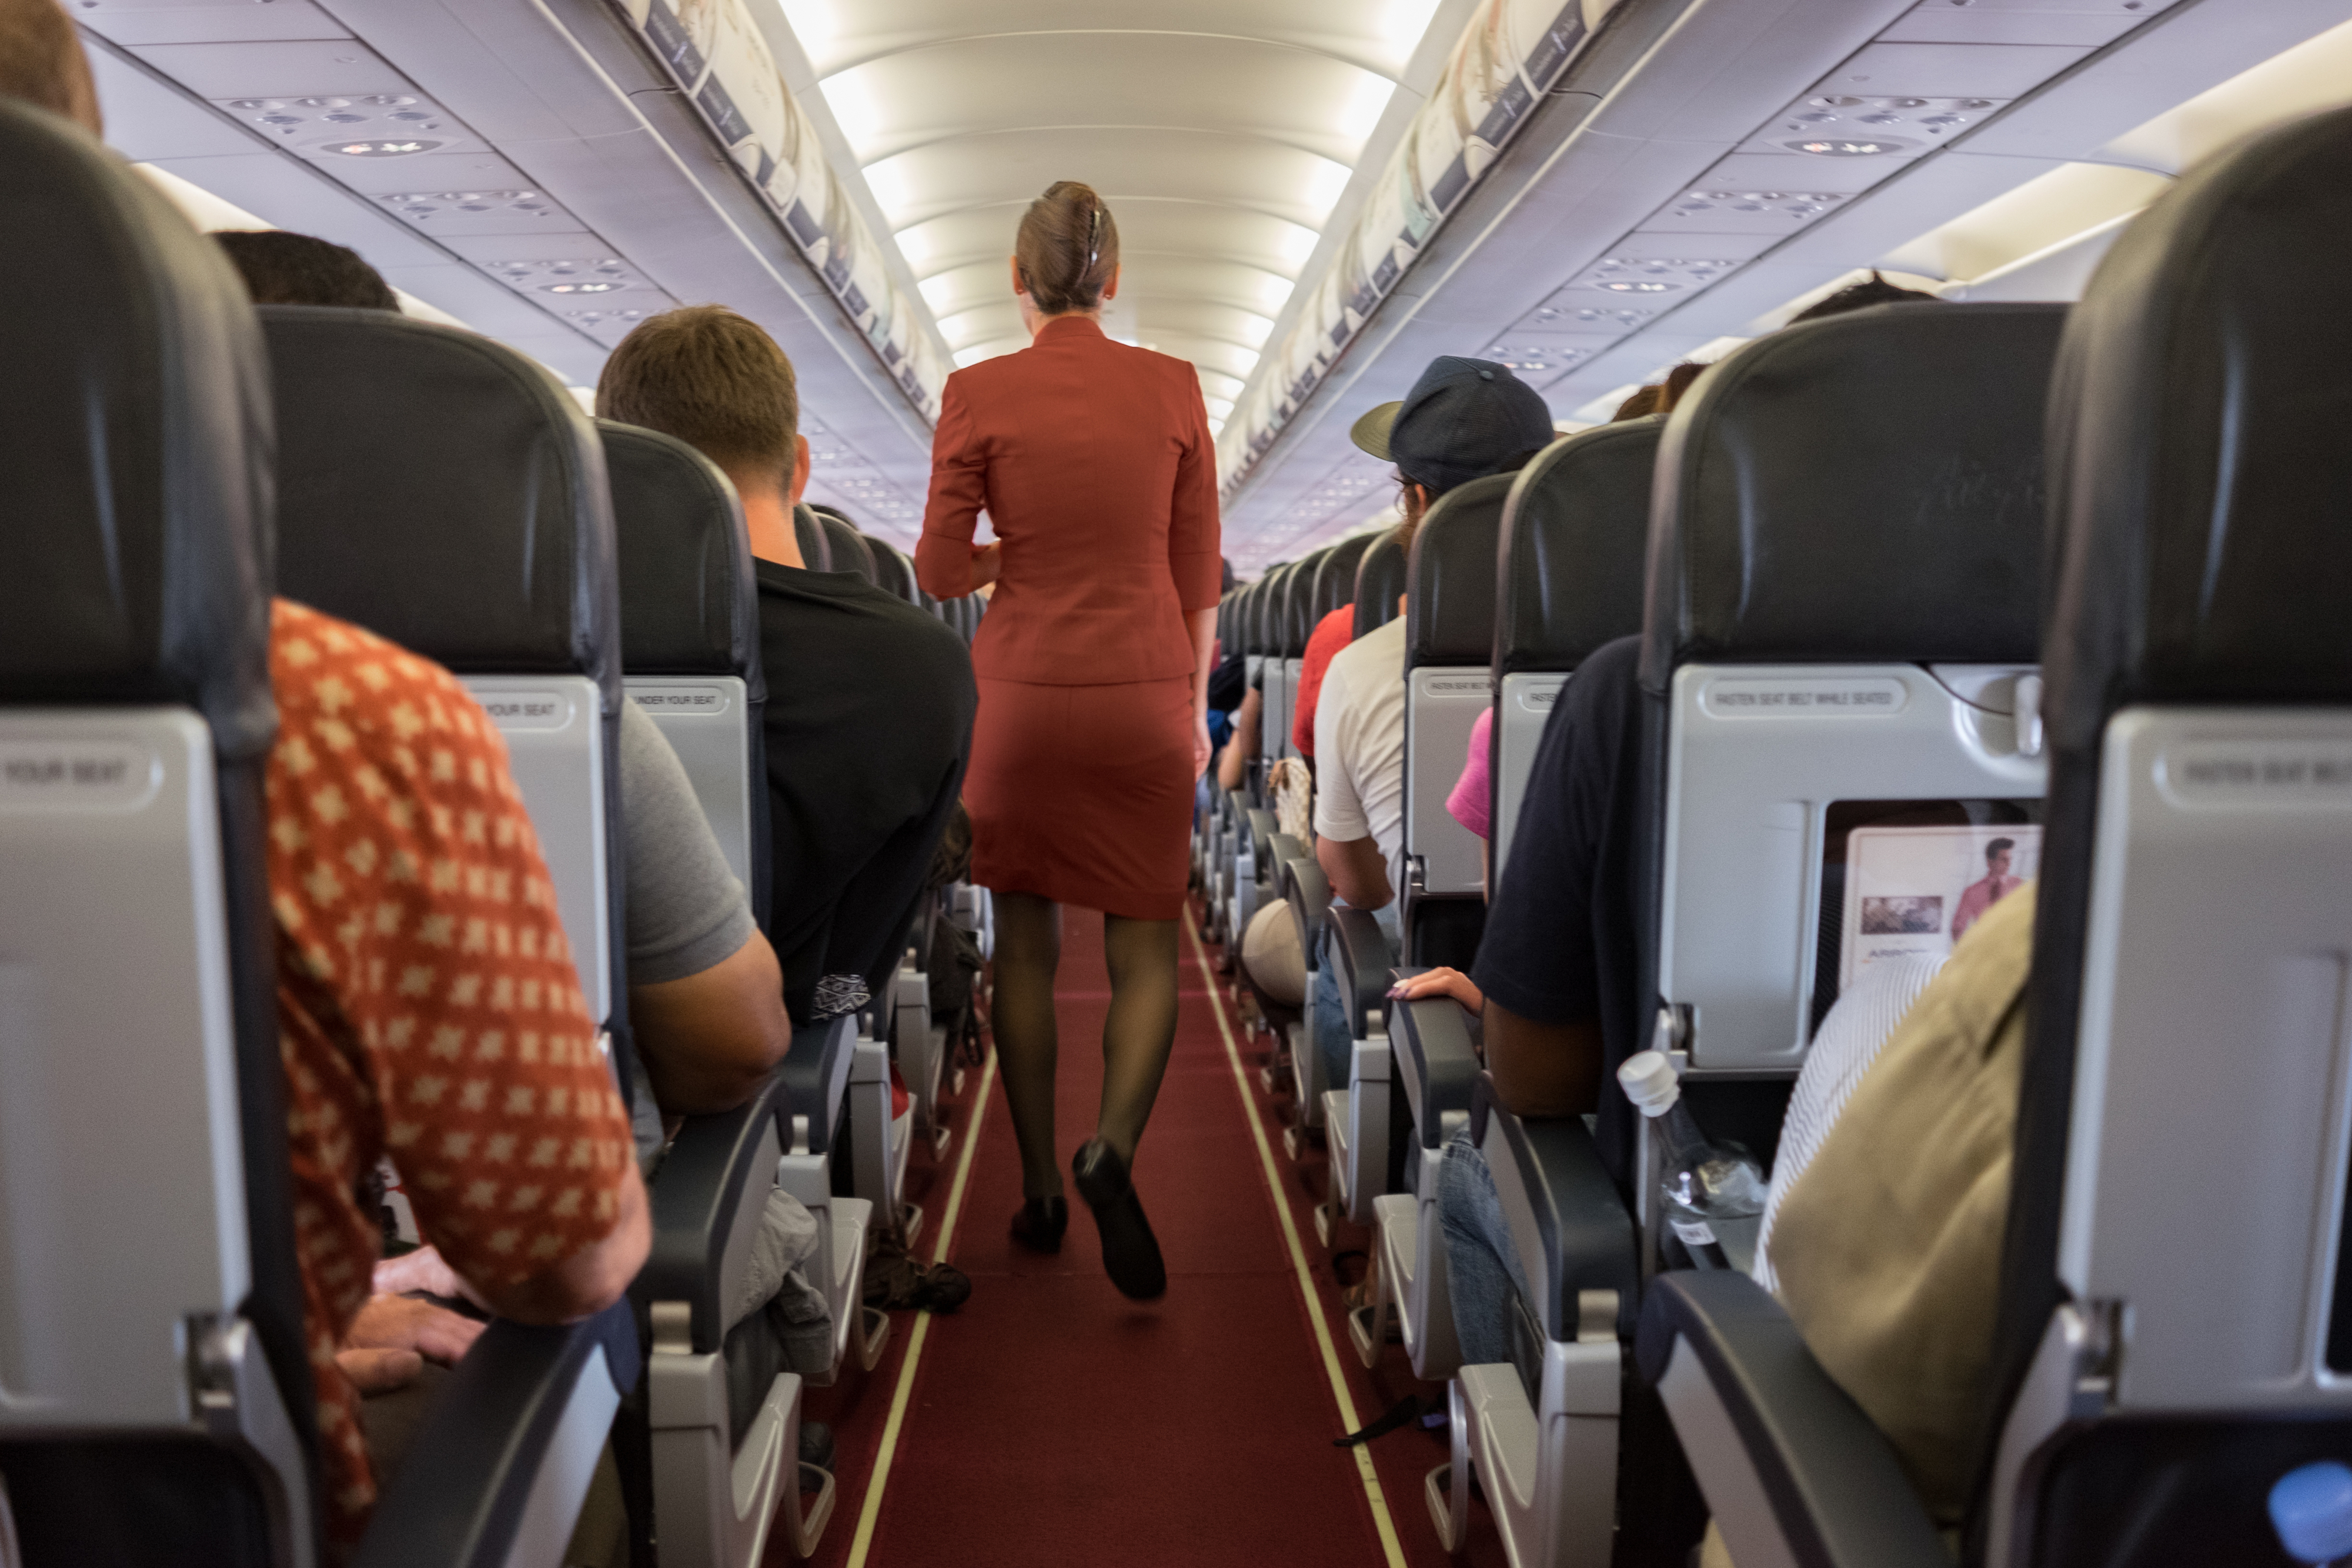 Flight attendant walking down the aisle of an airplane with seated passengers